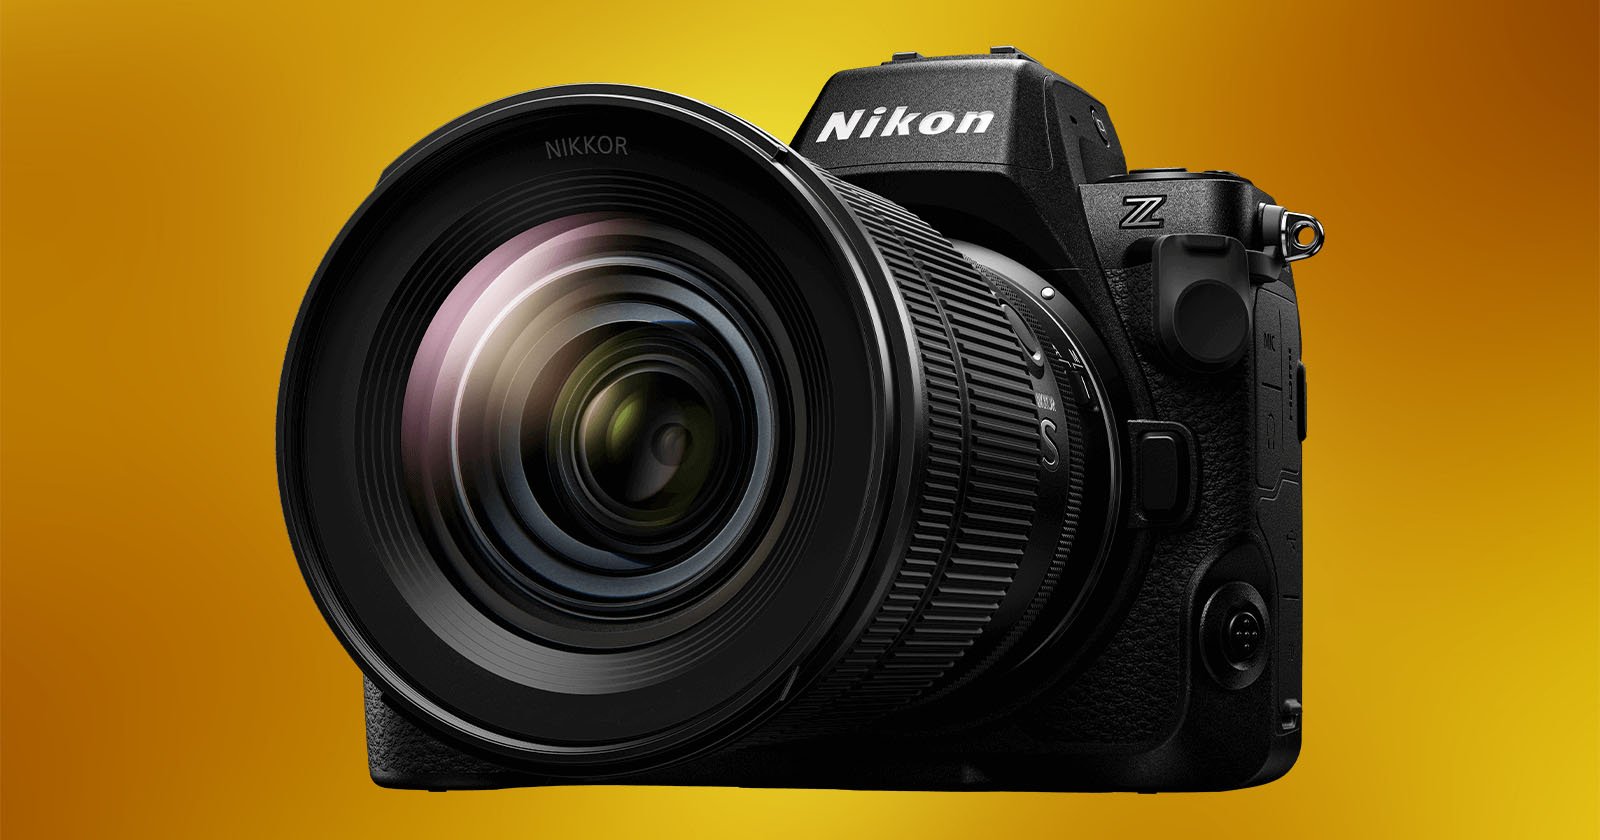  nikon says passionate about providing firmware updates 